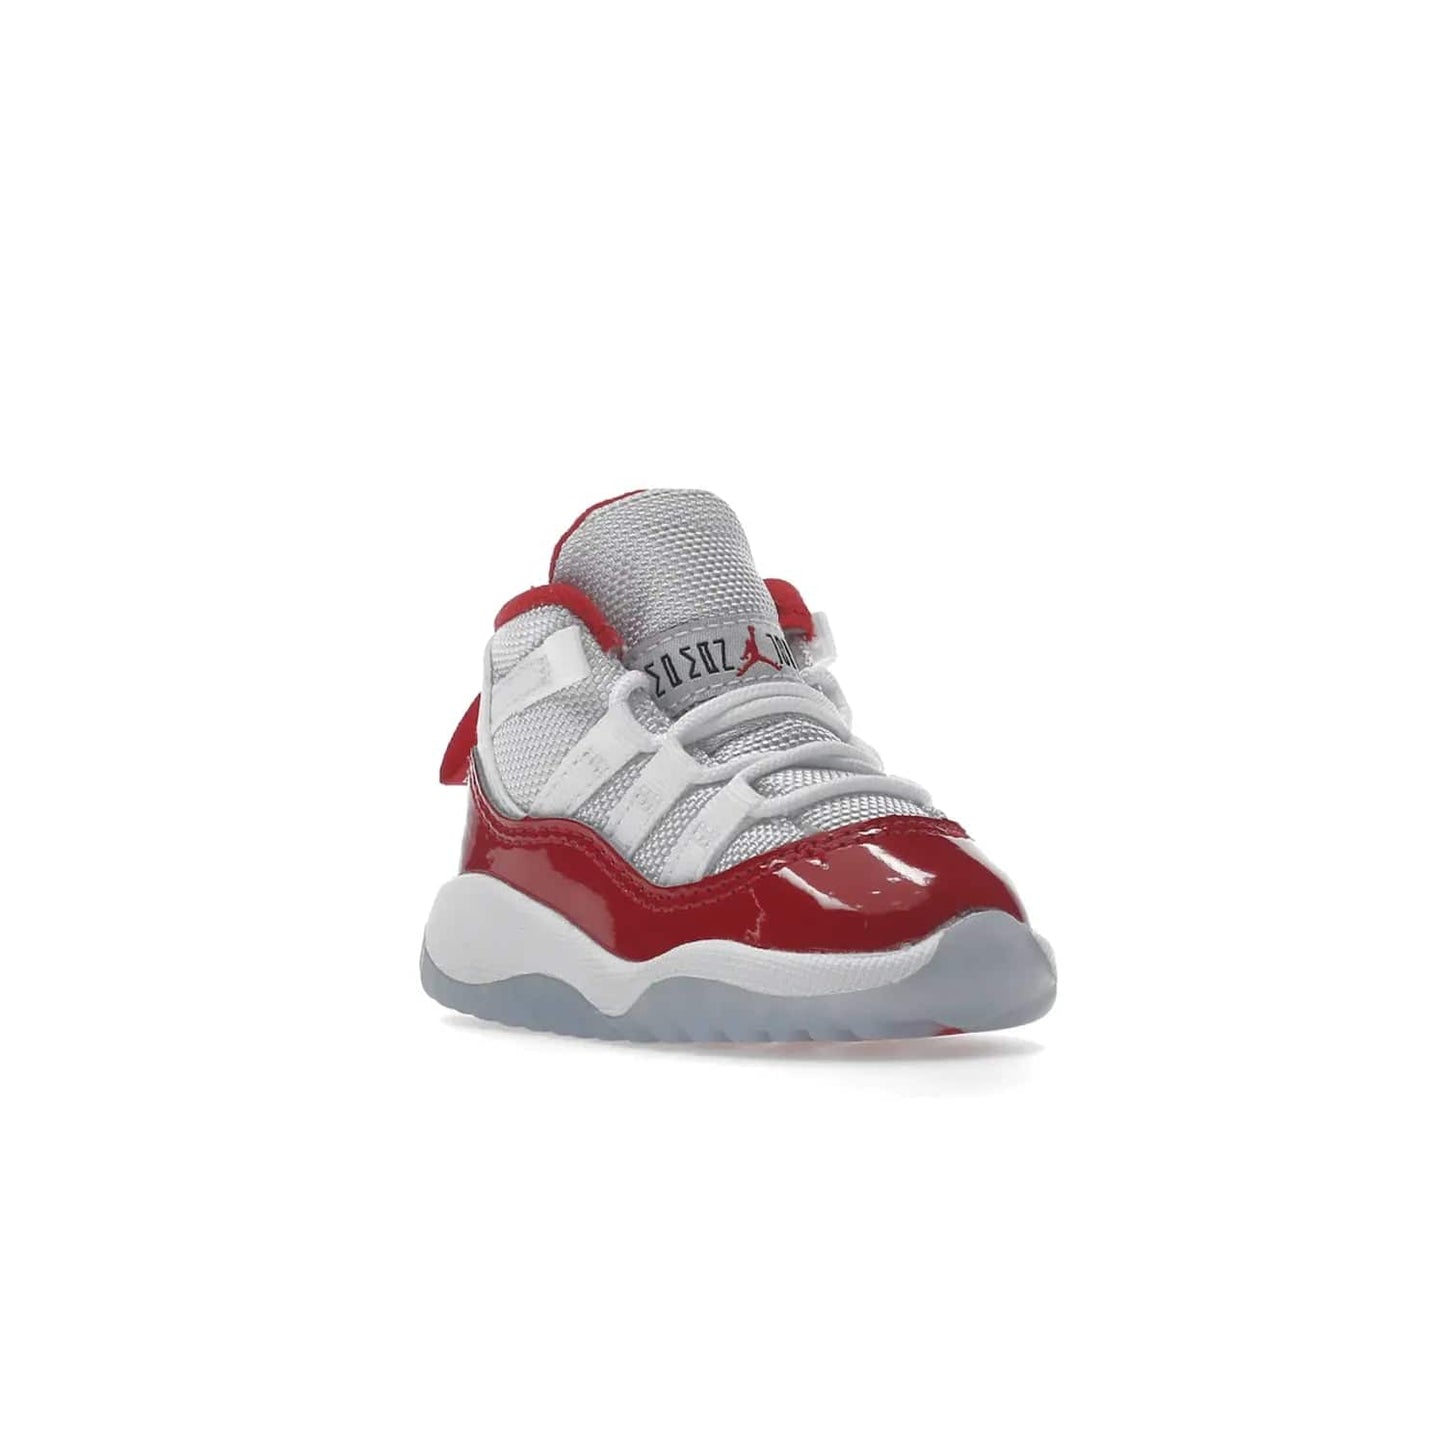 Jordan 11 Retro Cherry (2022) (TD) - Image 6 - Only at www.BallersClubKickz.com - Timeless classic. Air Jordan 11 Retro Cherry 2022 TD combines mesh, leather & suede for a unique look. White upper with varsity red suede. Jumpman logo on collar & tongue. Available Dec 10th, priced at $80.